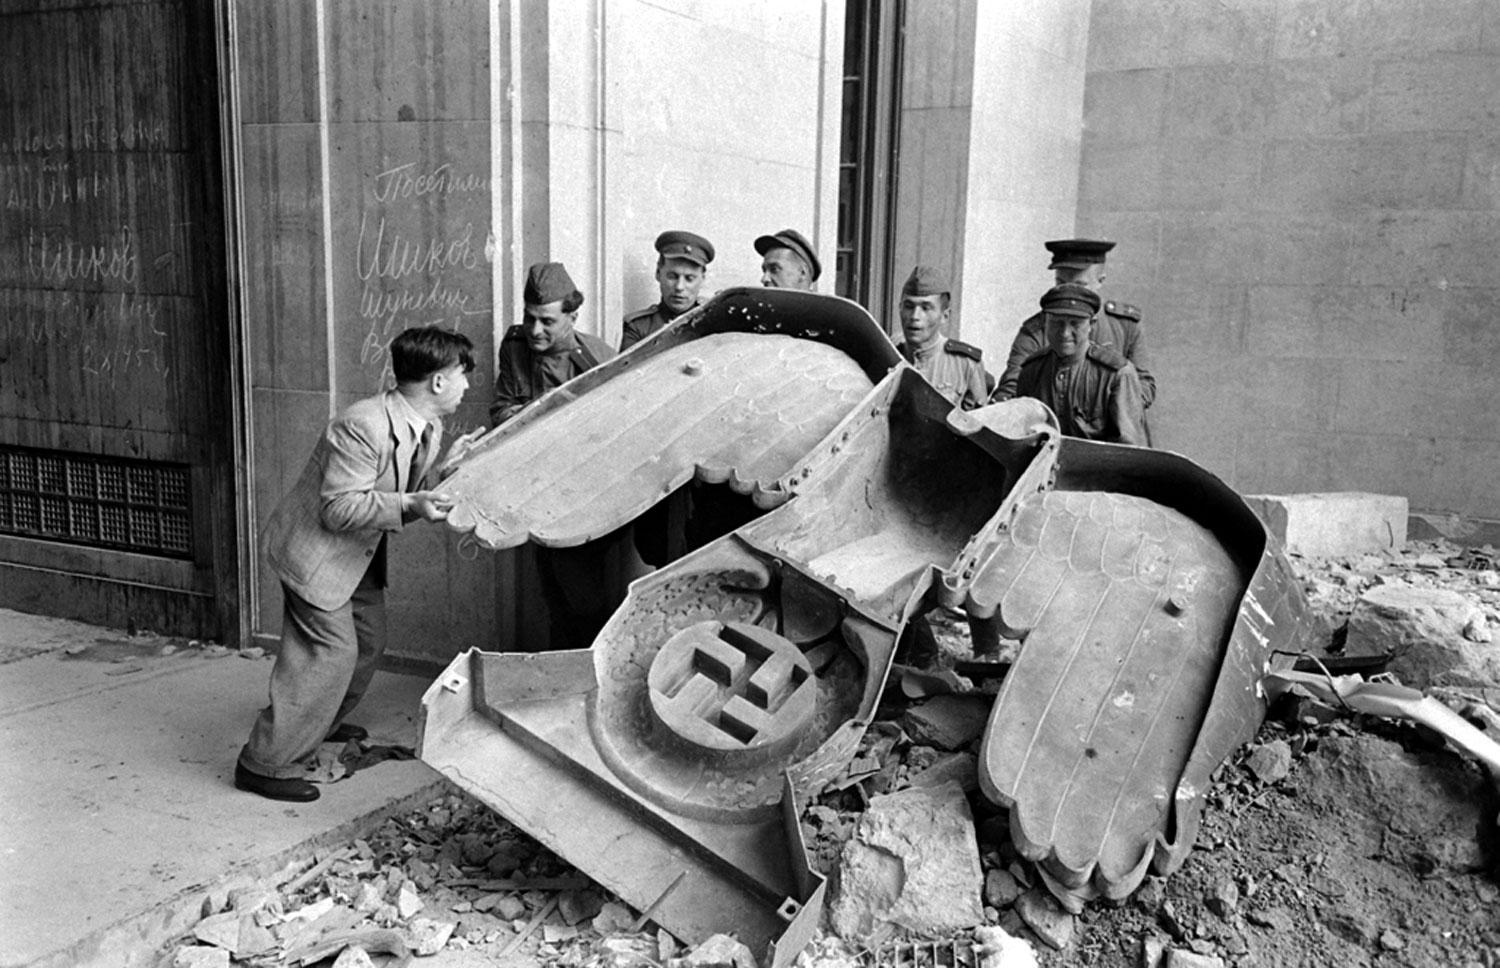 Russian soldiers and a civilian struggle to move a large bronze Nazi Party eagle that once loomed over a doorway of the Reich Chancellery, Berlin, 1945.